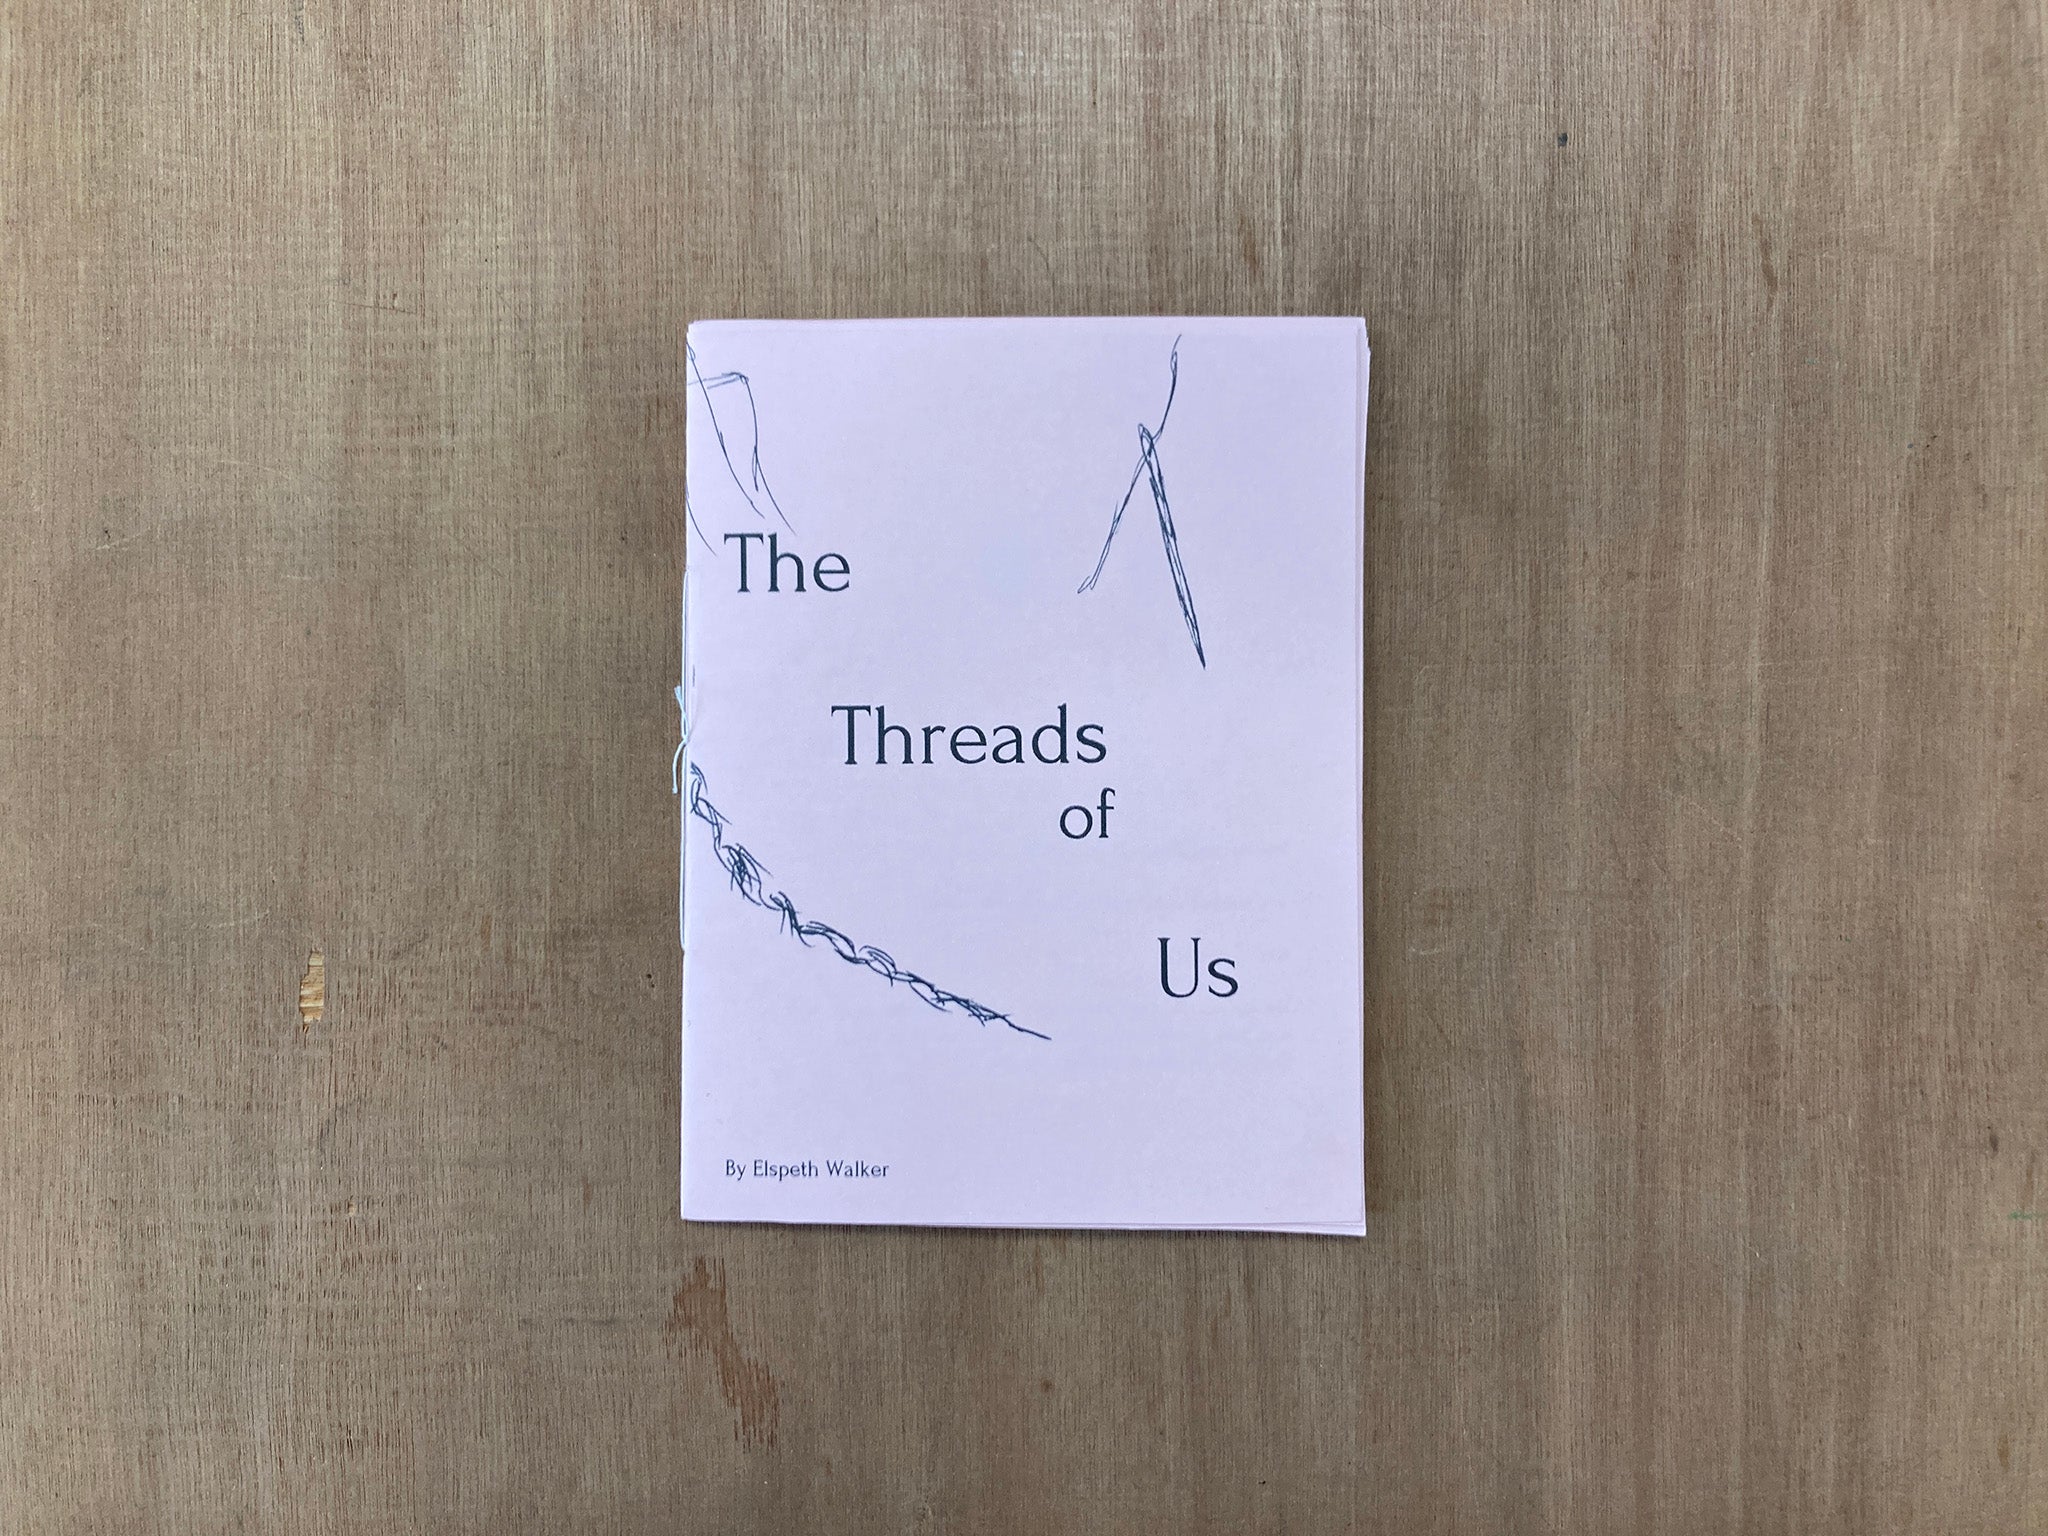 THE THREADS OF US by Elspeth Walker